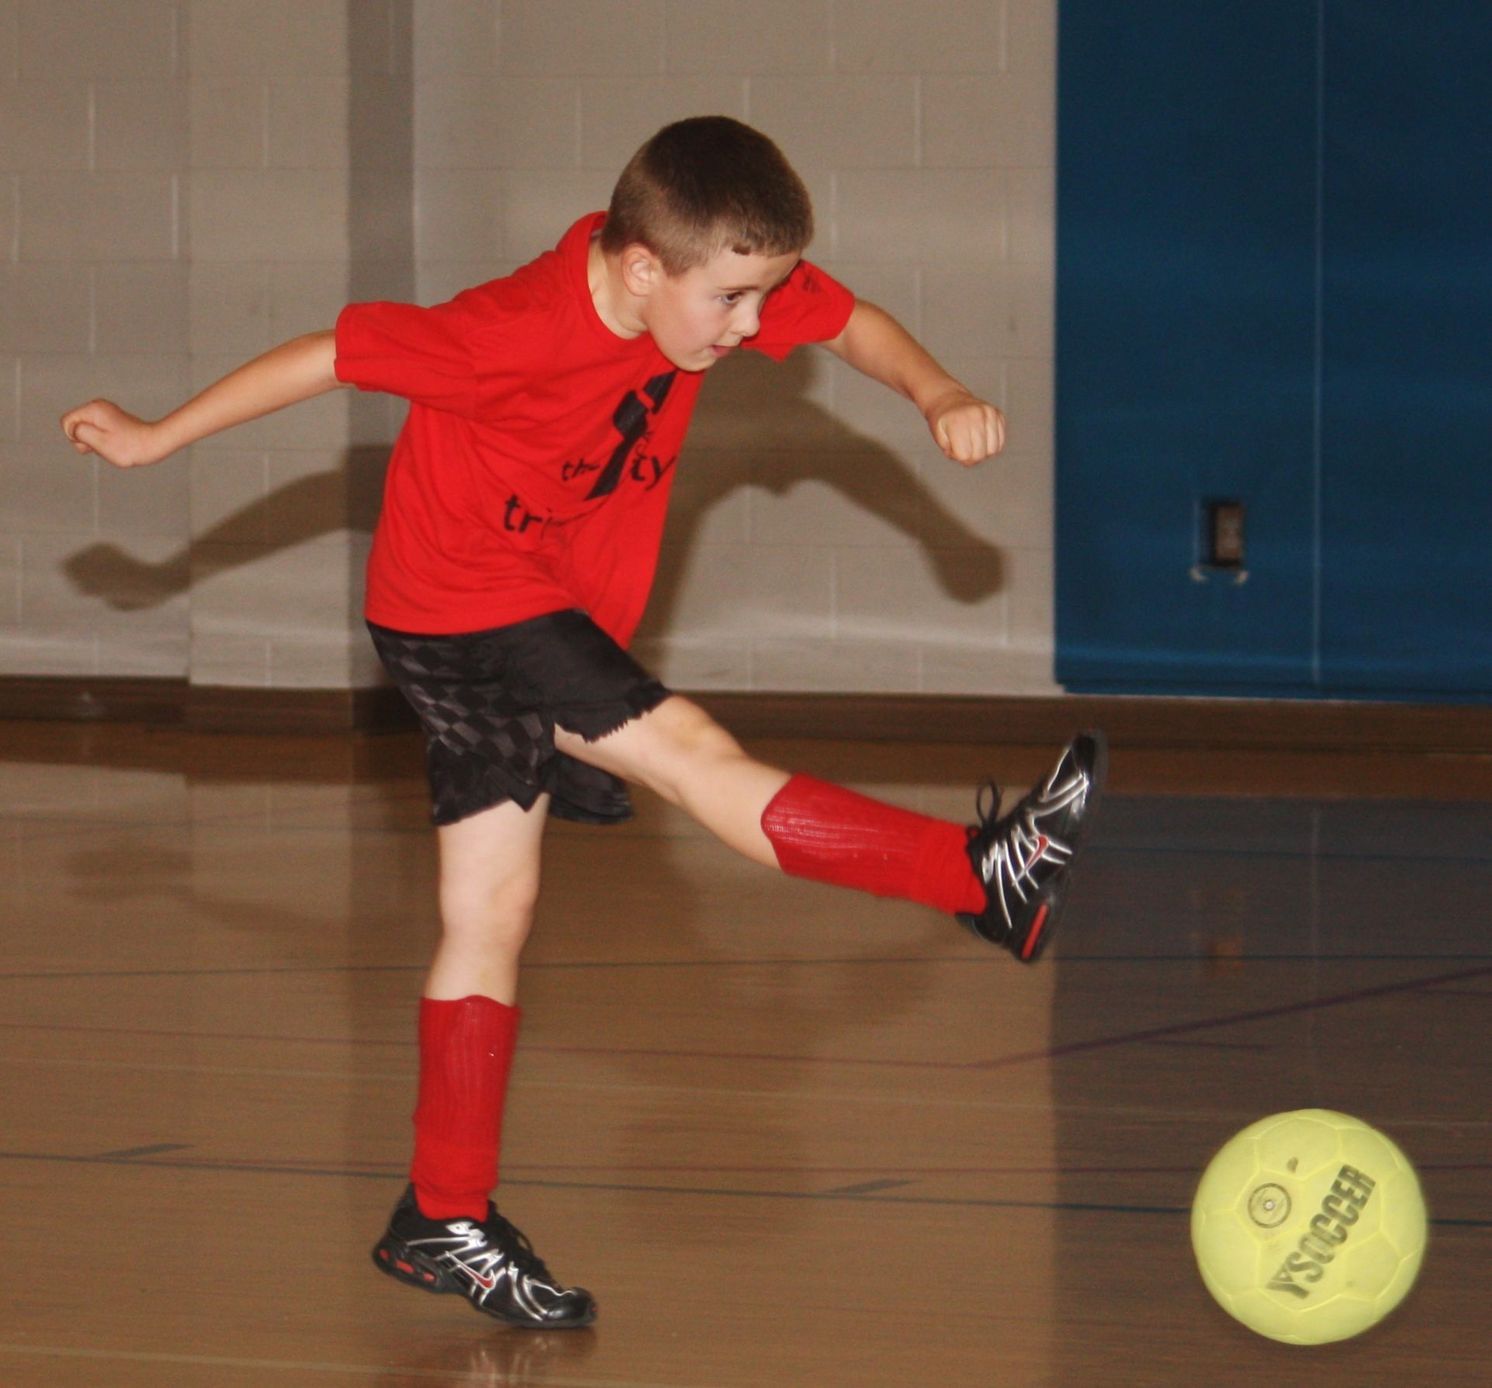 tri county indoor soccer